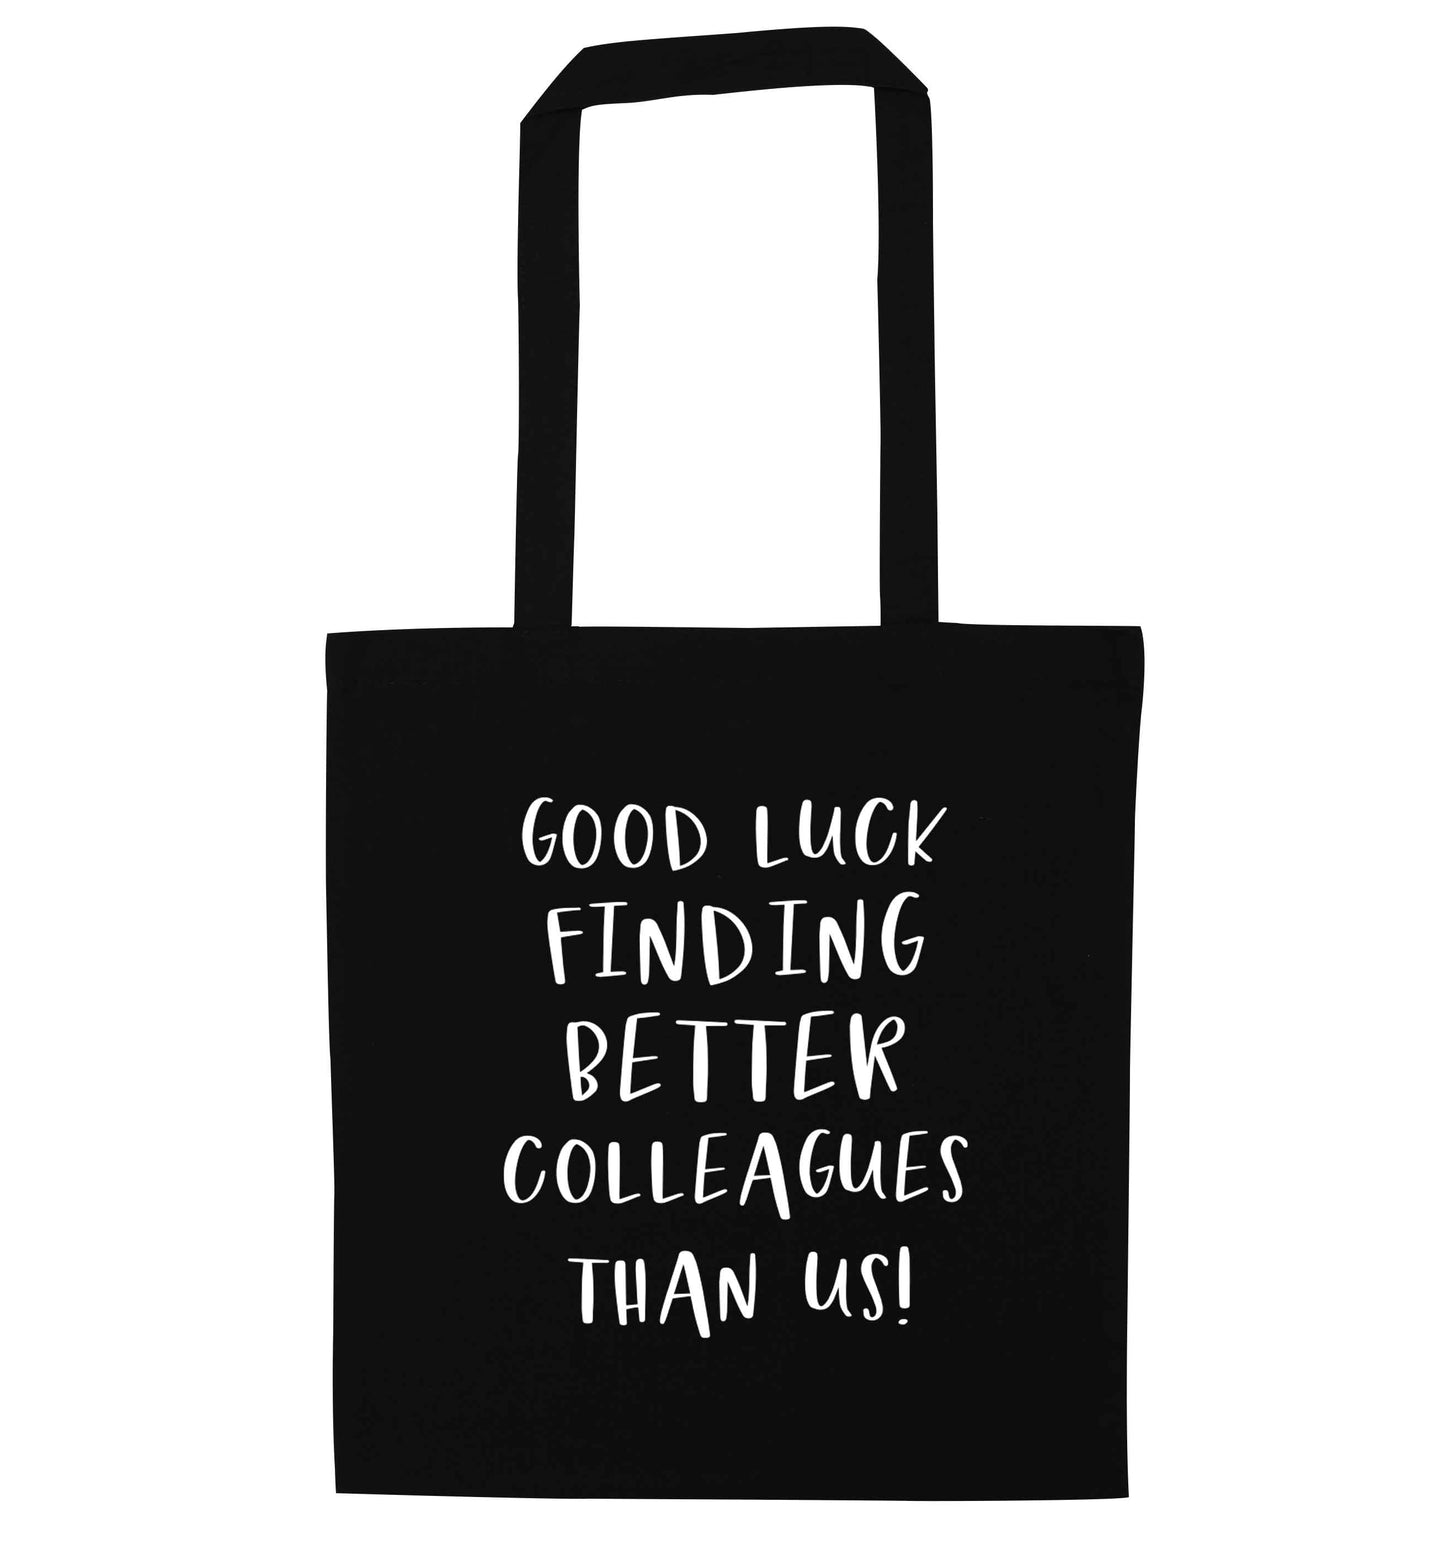 Good luck finding better colleagues than us! black tote bag